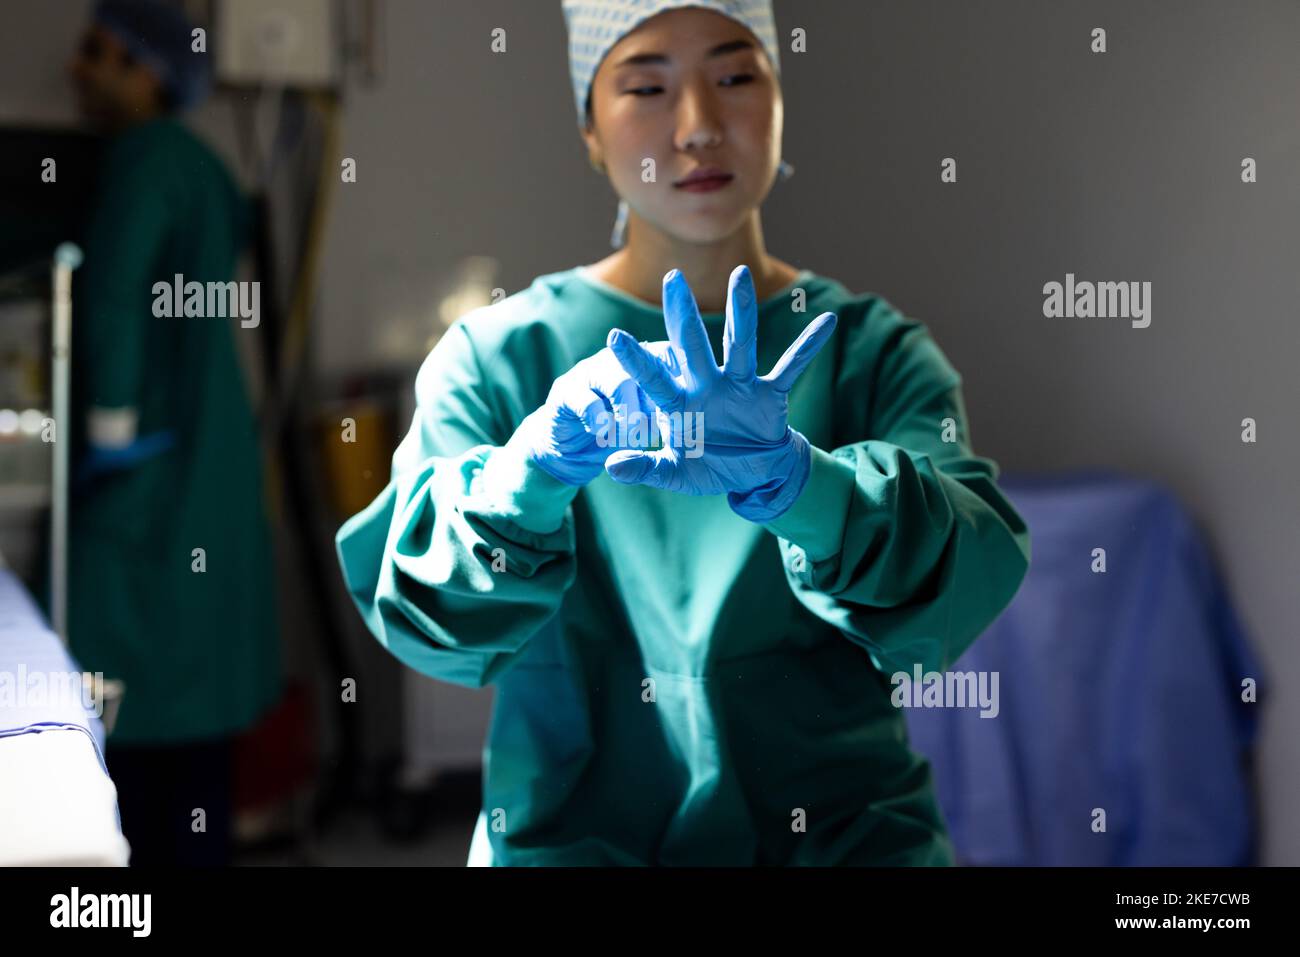 Asian female surgeon in surgical cap and gown putting on gloves in operating theatre Stock Photo